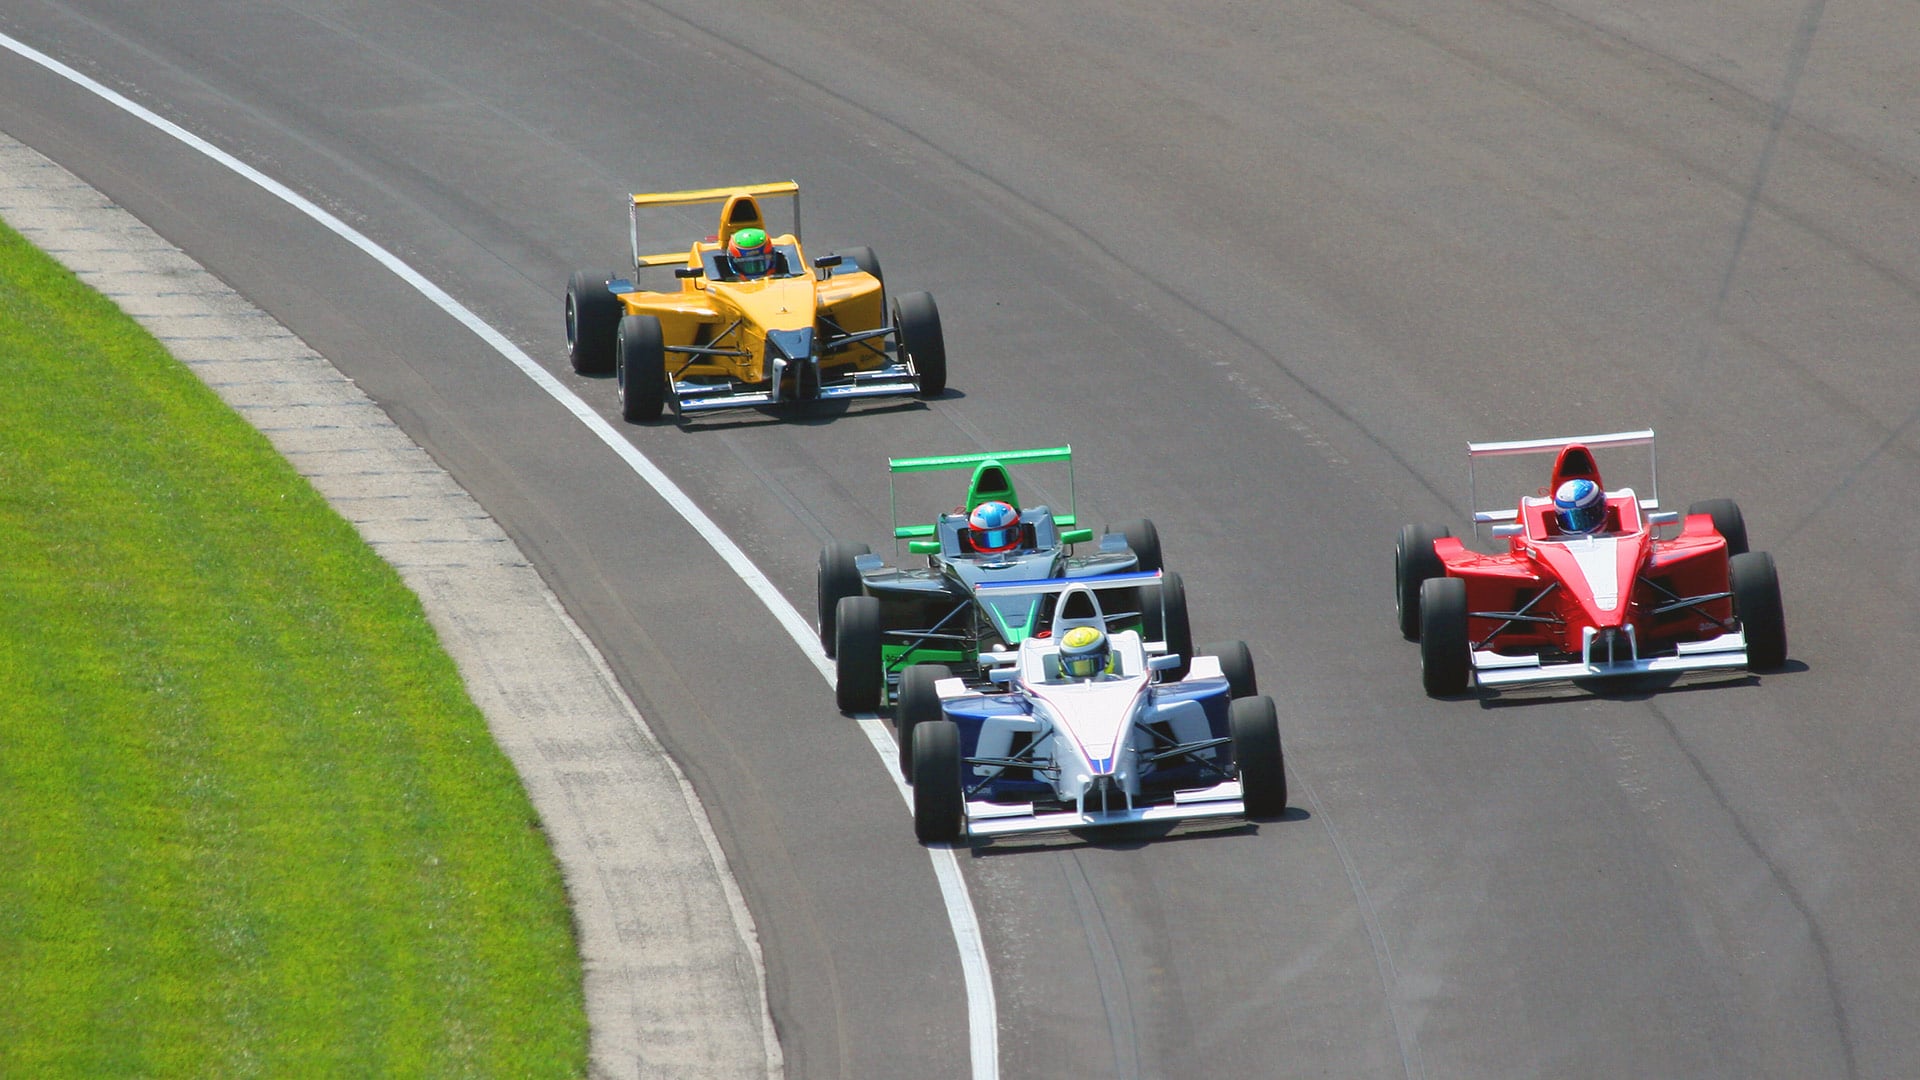 Race cars on Indianapolis Motor Speedway